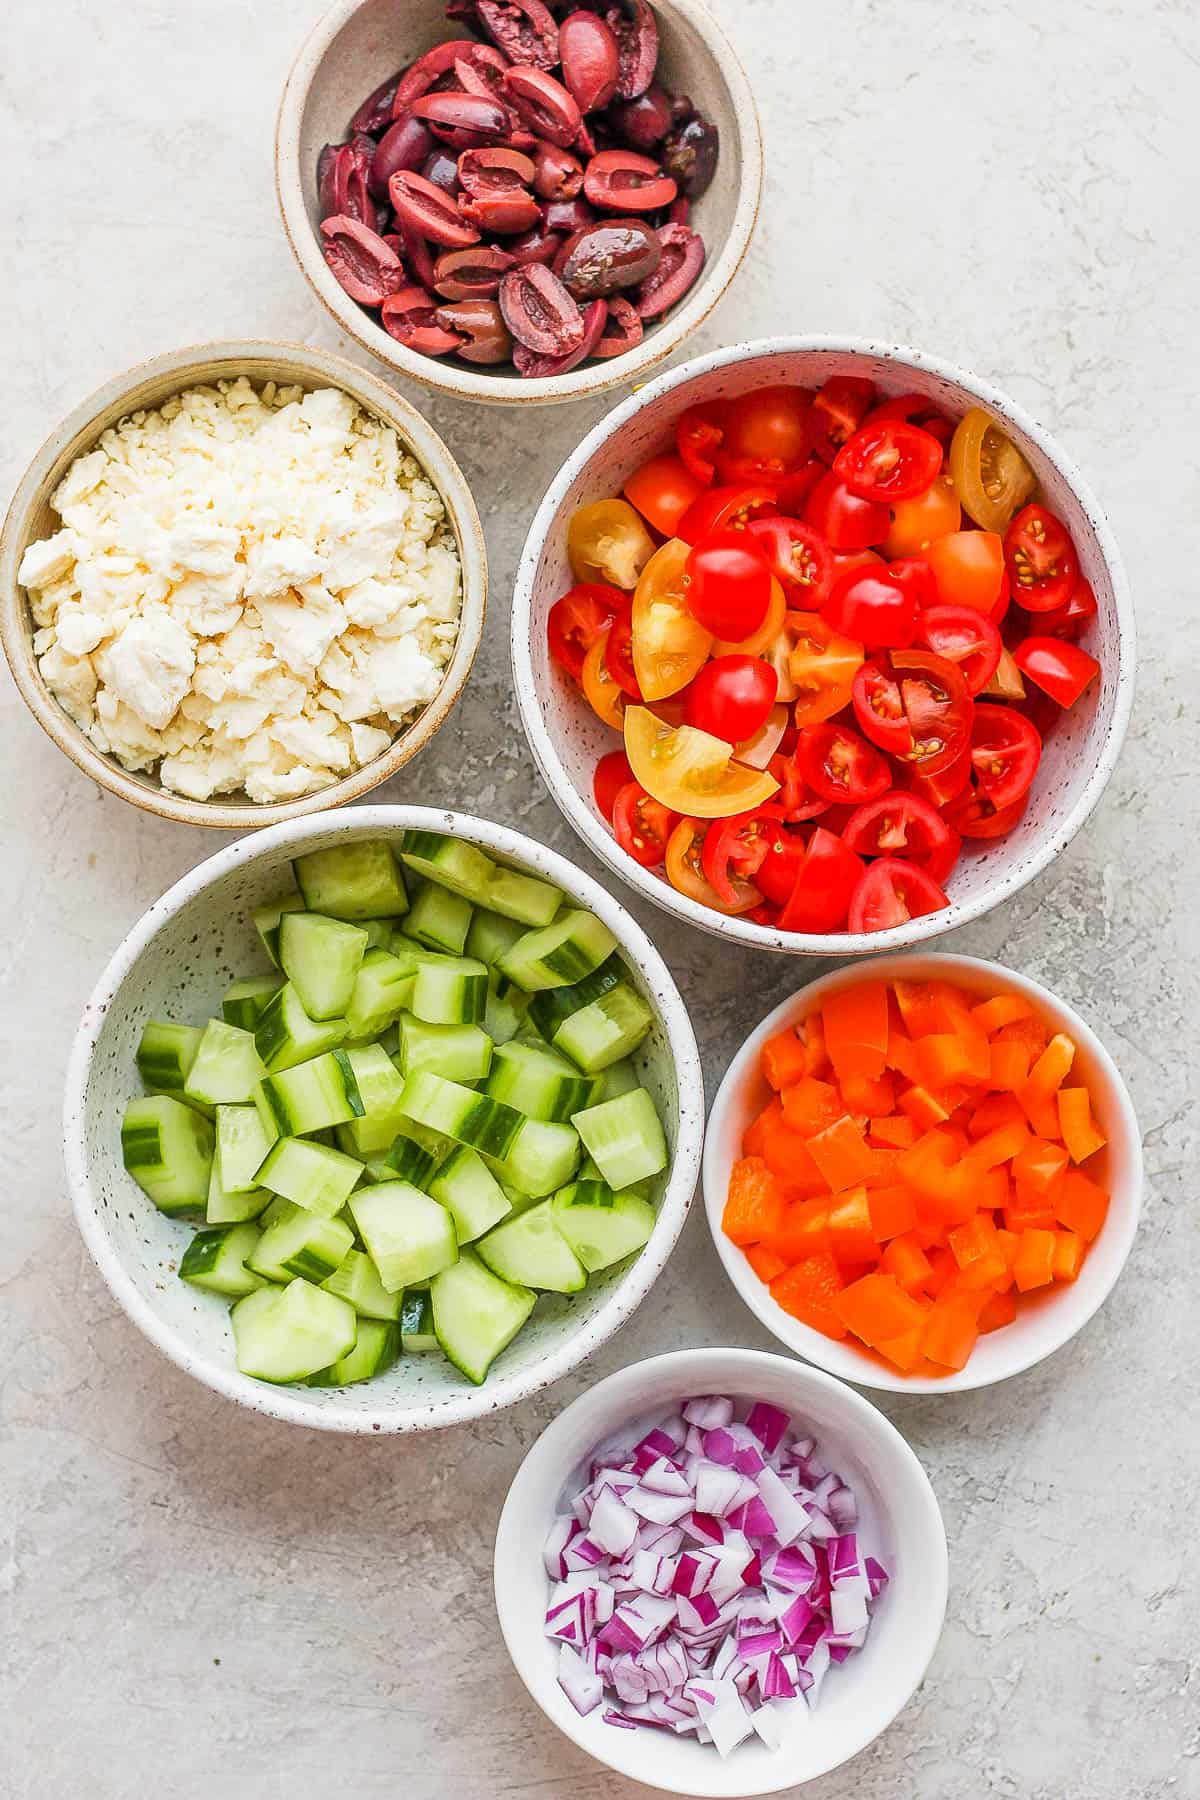 Kalamata olives, feta cheese, halved cherry tomatoes, chopped english cucumber, and chopped orange bell pepper each in their own prep bowls.